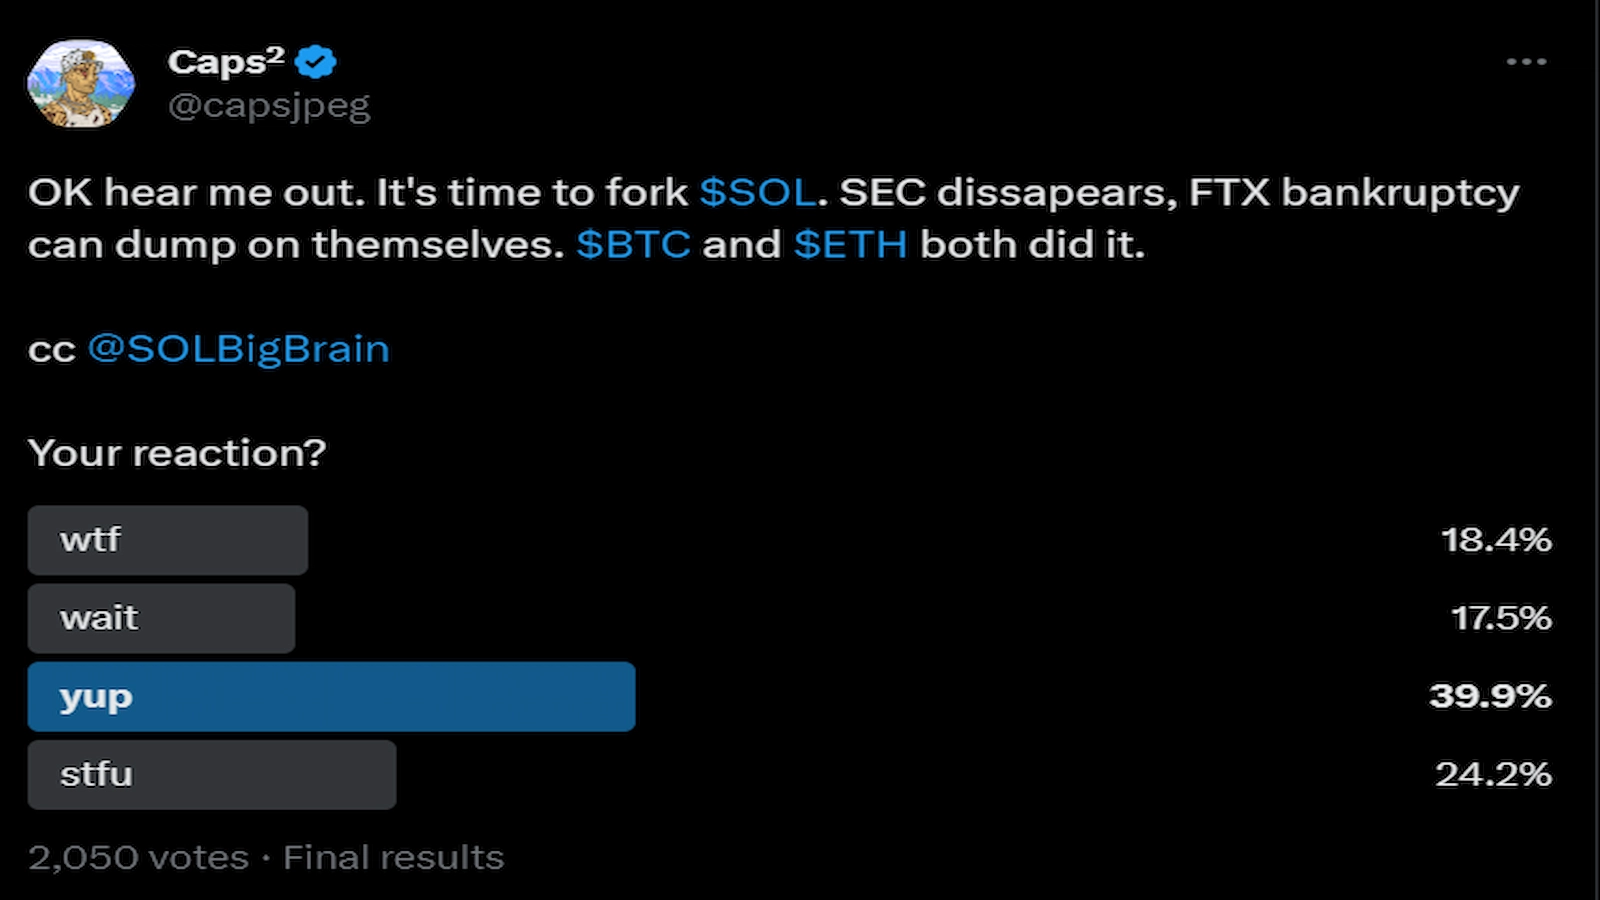 Nearly 40% of participants in a poll voted in favor of a hardfork.